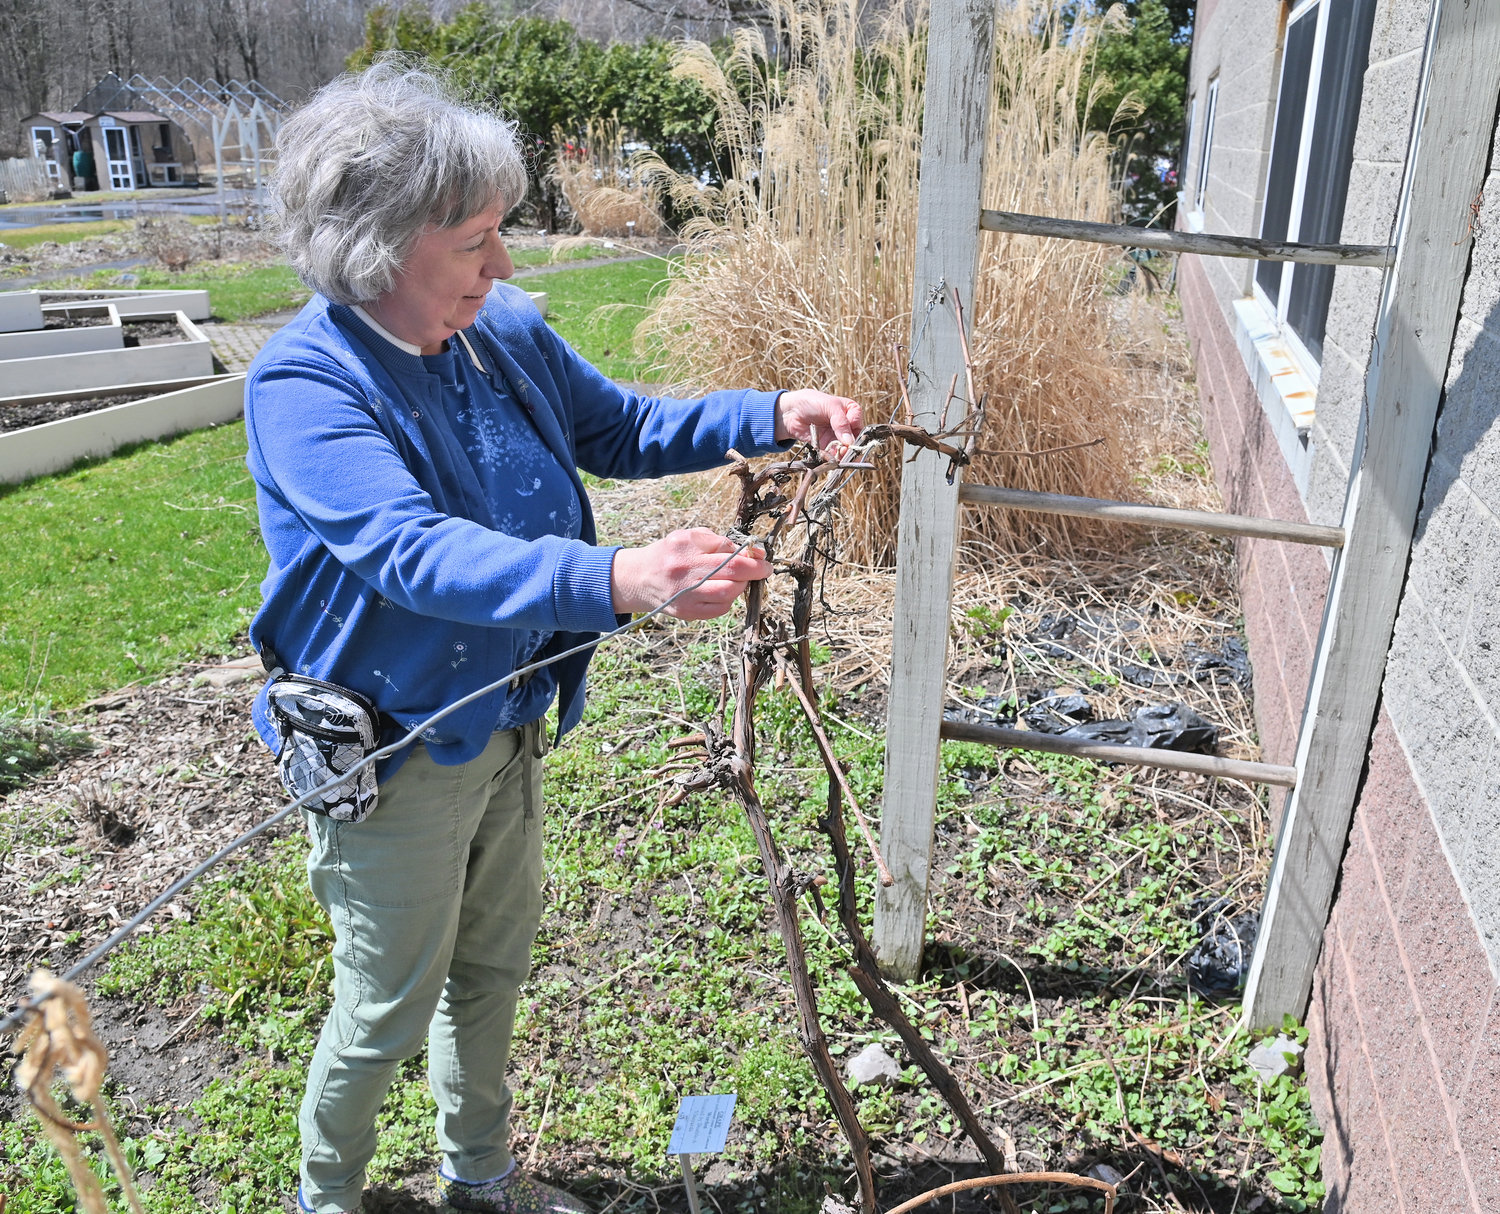 THROUGH THE GRAPEVINE — Holly Wise, of Cornell Cooperative Extension of Oneida County, looks over some grapevines in the gardens on the agency’s property off of Second Street in Oriskany. Gardening has experienced a boom in growth since the start of the COVID-19 pandemic with no signs of slowing.